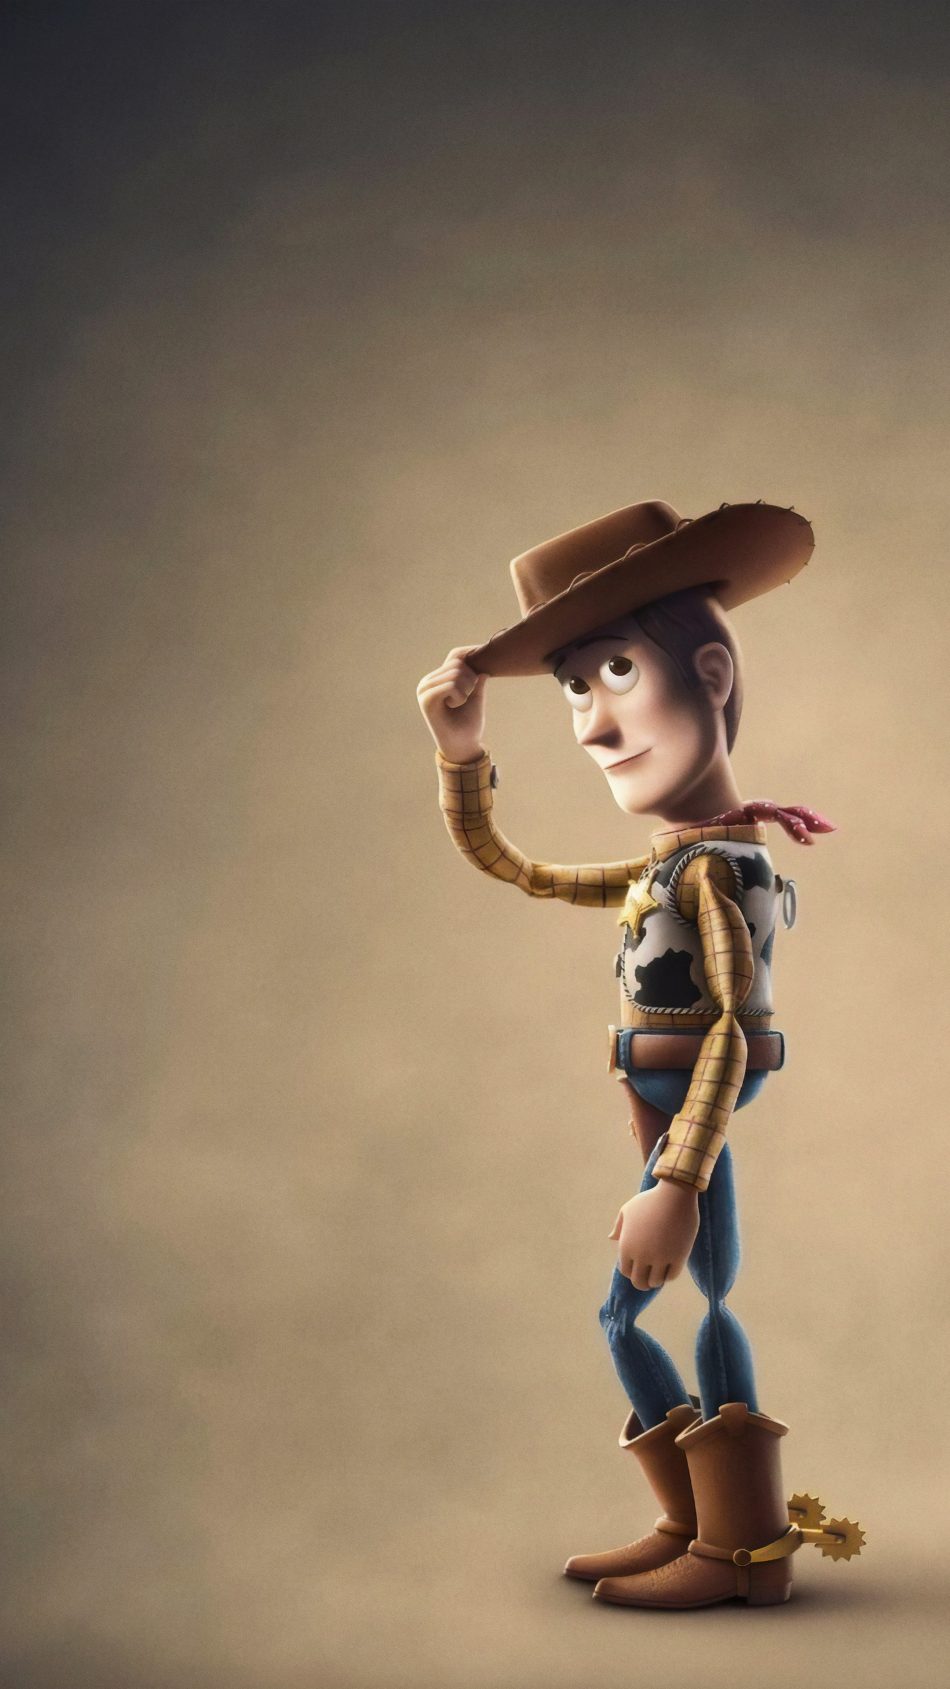 Woody Toy Story 4 4K Ultra HD Mobile Wallpaper